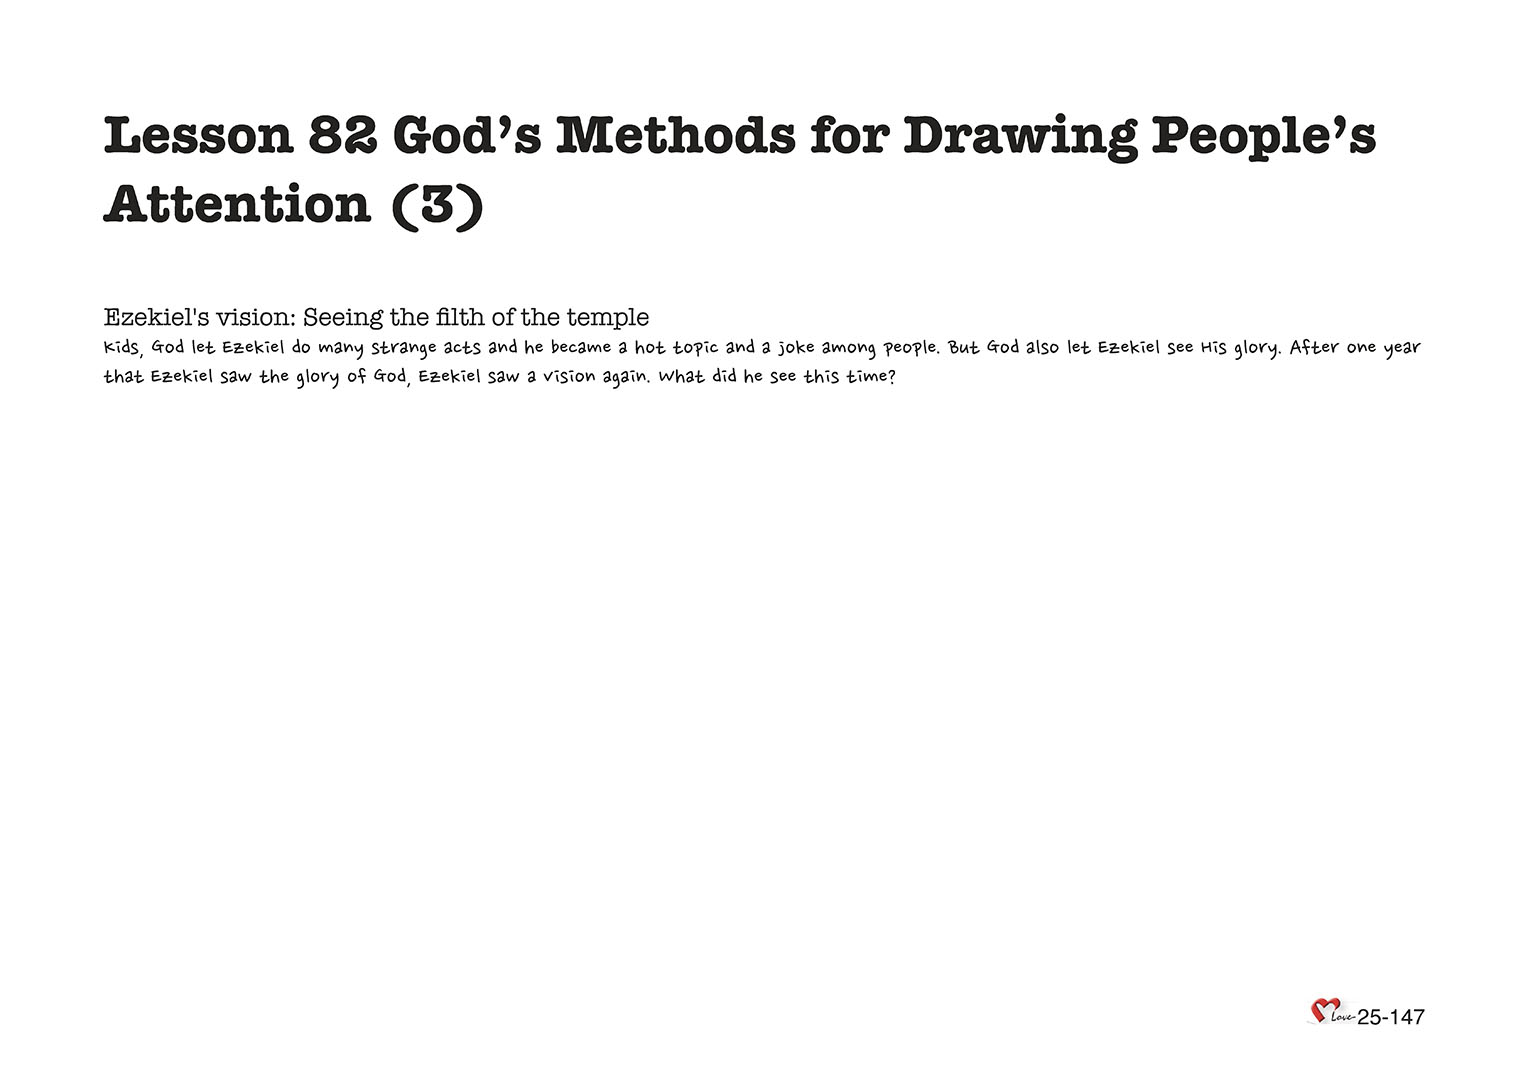 Chapter 25 - Lesson 82 - God’s Methods for Drawing People's Attention (3)